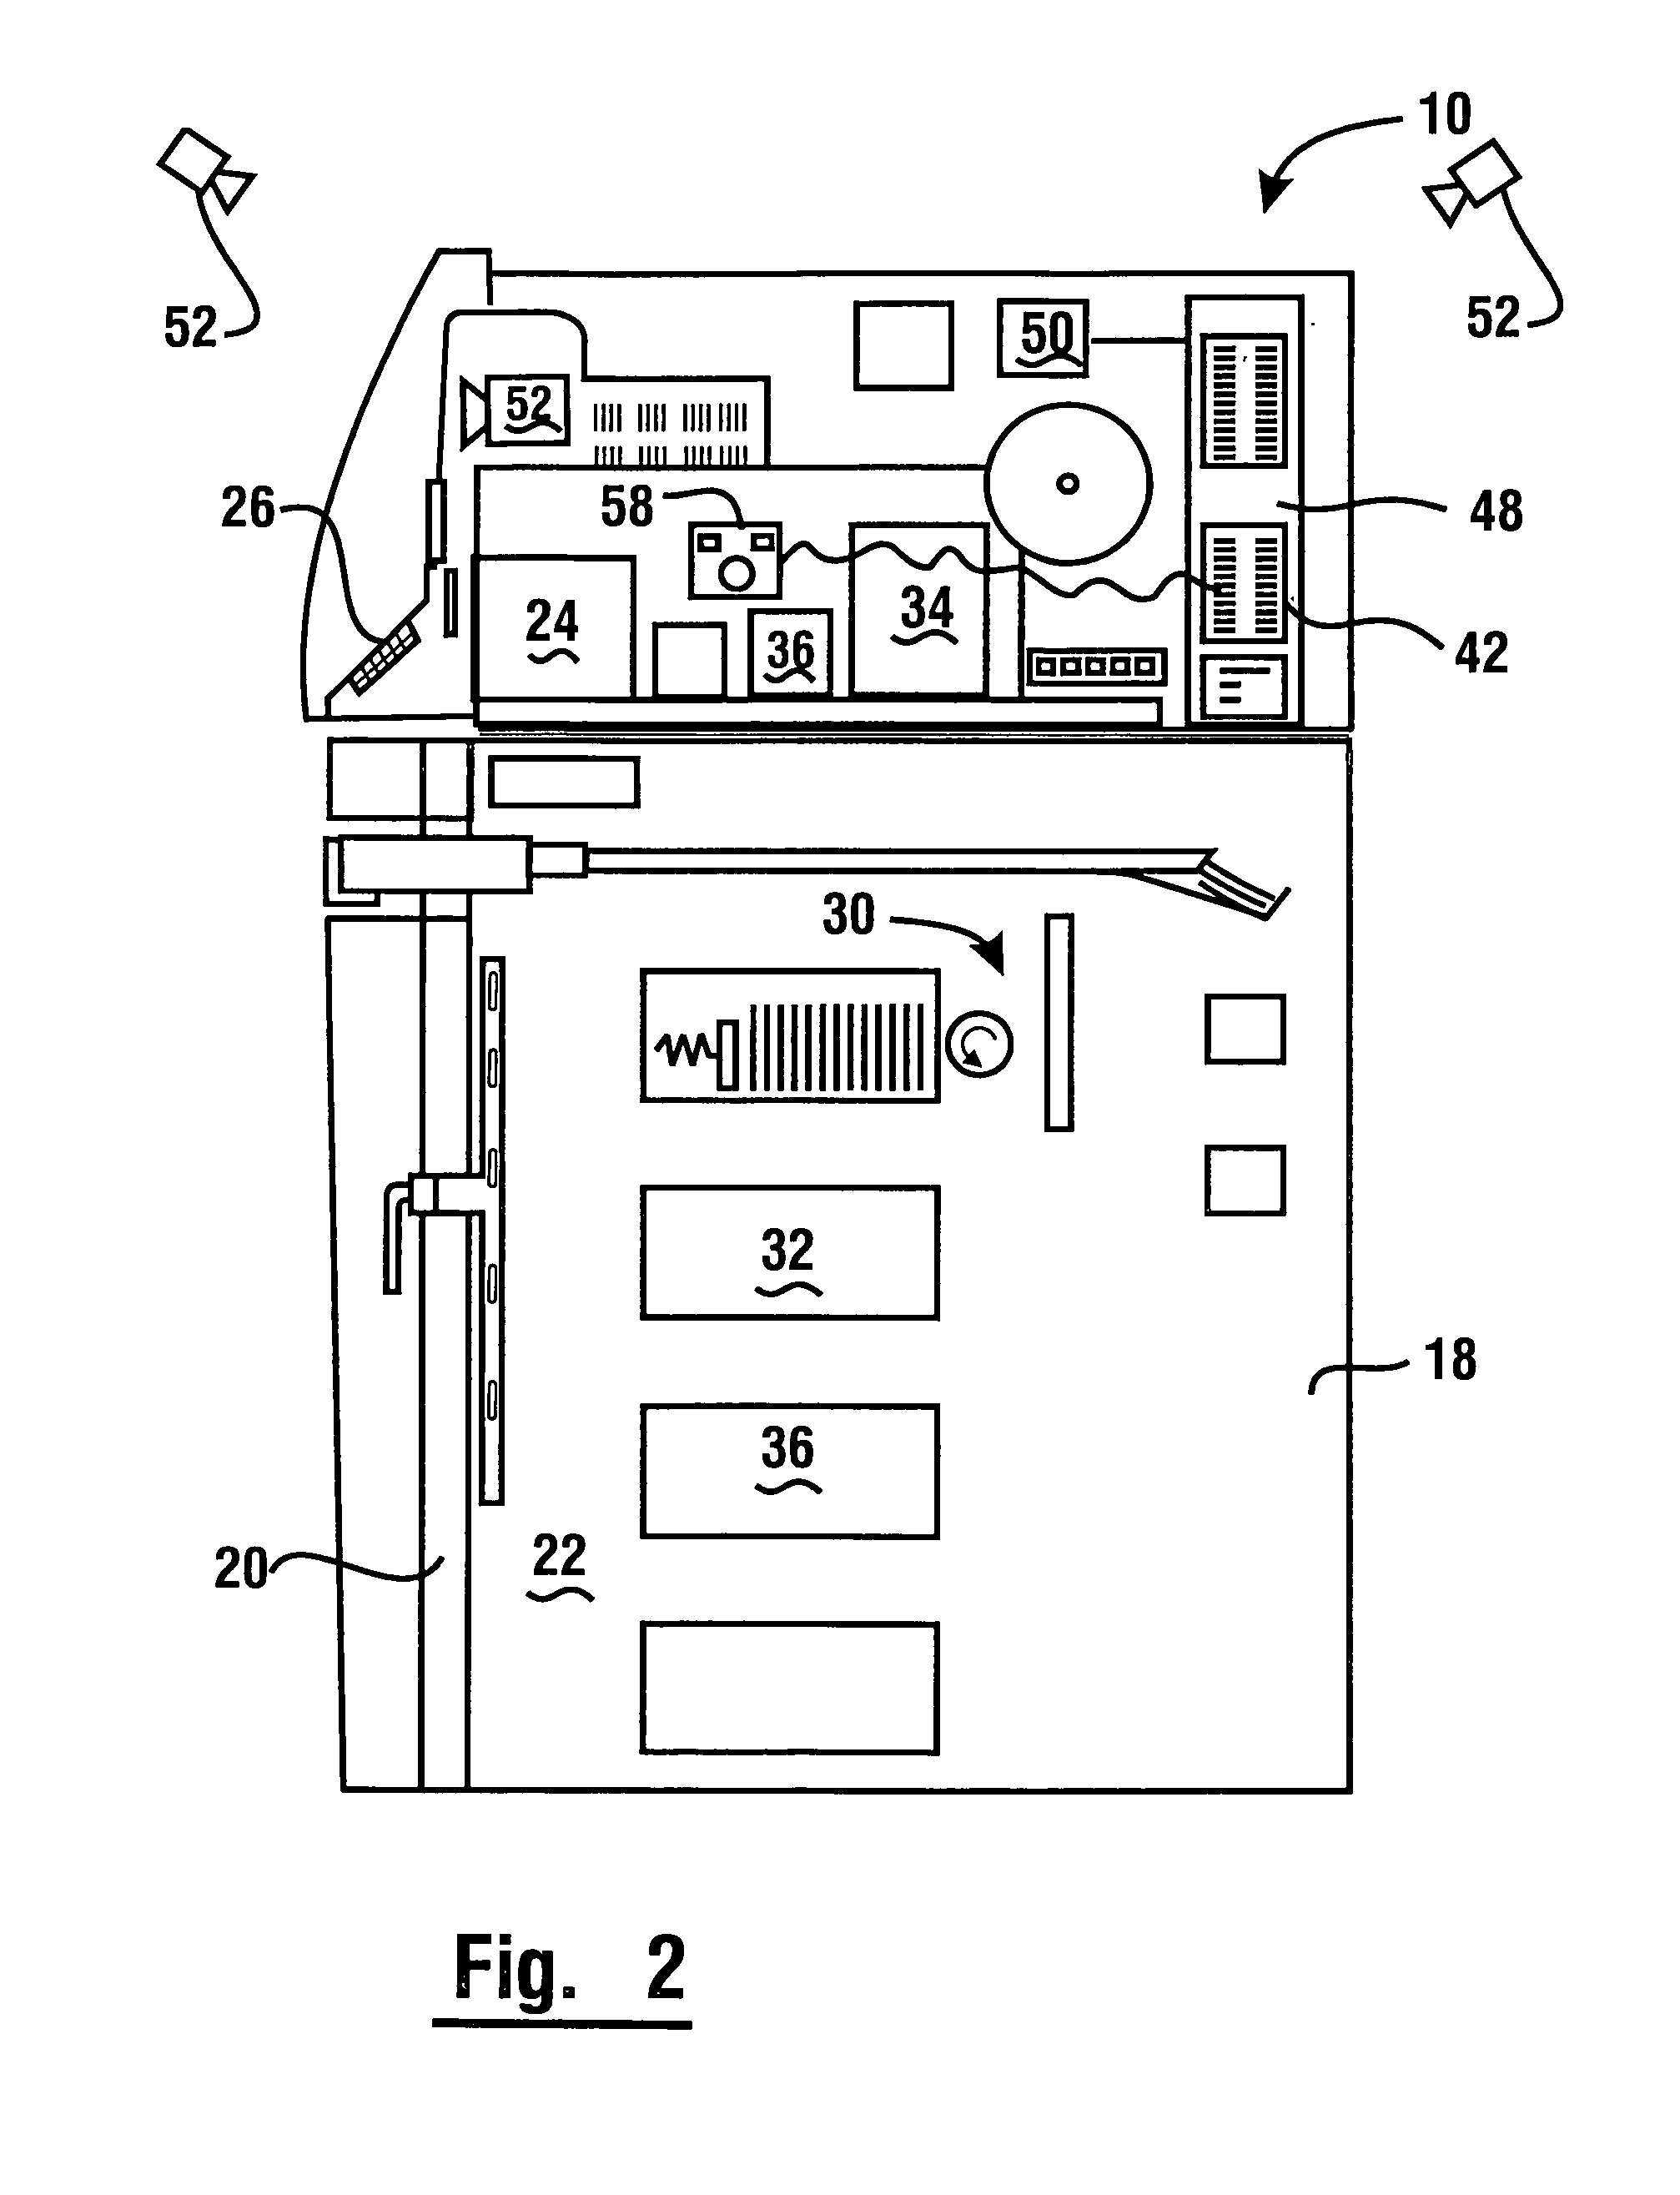 Automated banking system controlled responsive to data bearing records